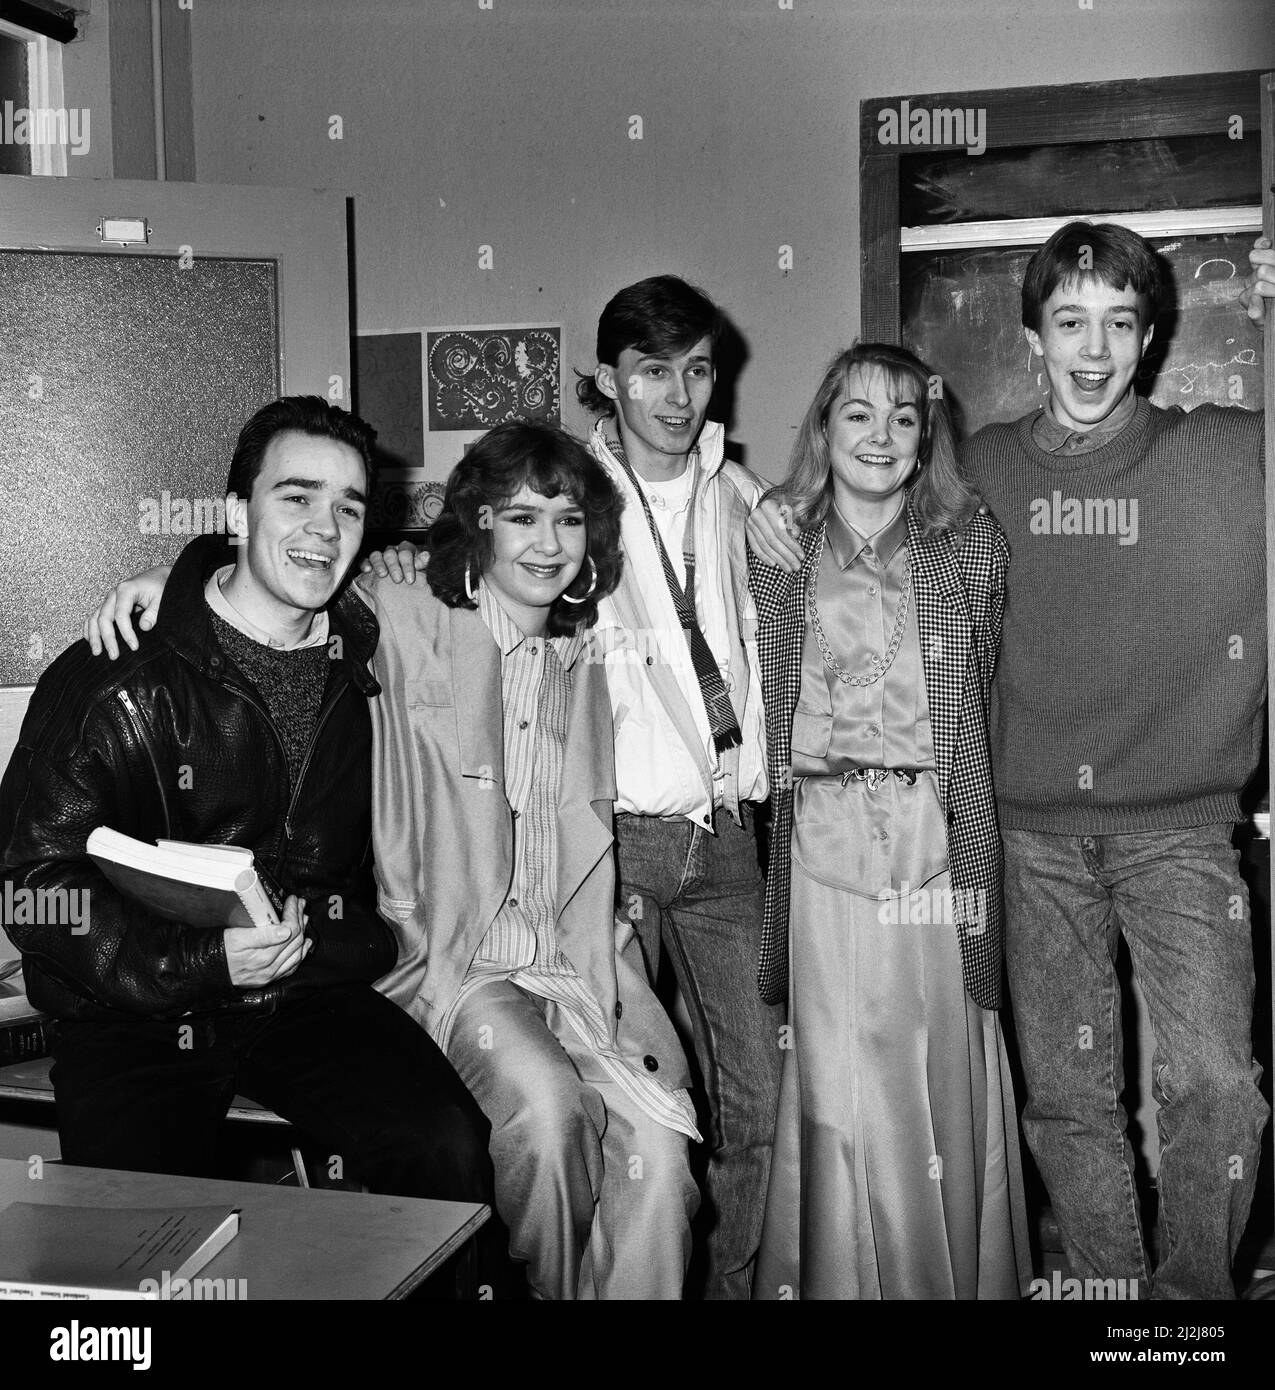 Past and present members of the cast of the BBC children's television series Grange Hill celebrate the programme's 10th anniversary at the BBC in Borehamwood, Hertfordshire. Left to right: Todd Carty, Susan Tully, Mark Baxter, Alison Bettles and John McMahon. 3rd February 1987. Stock Photo